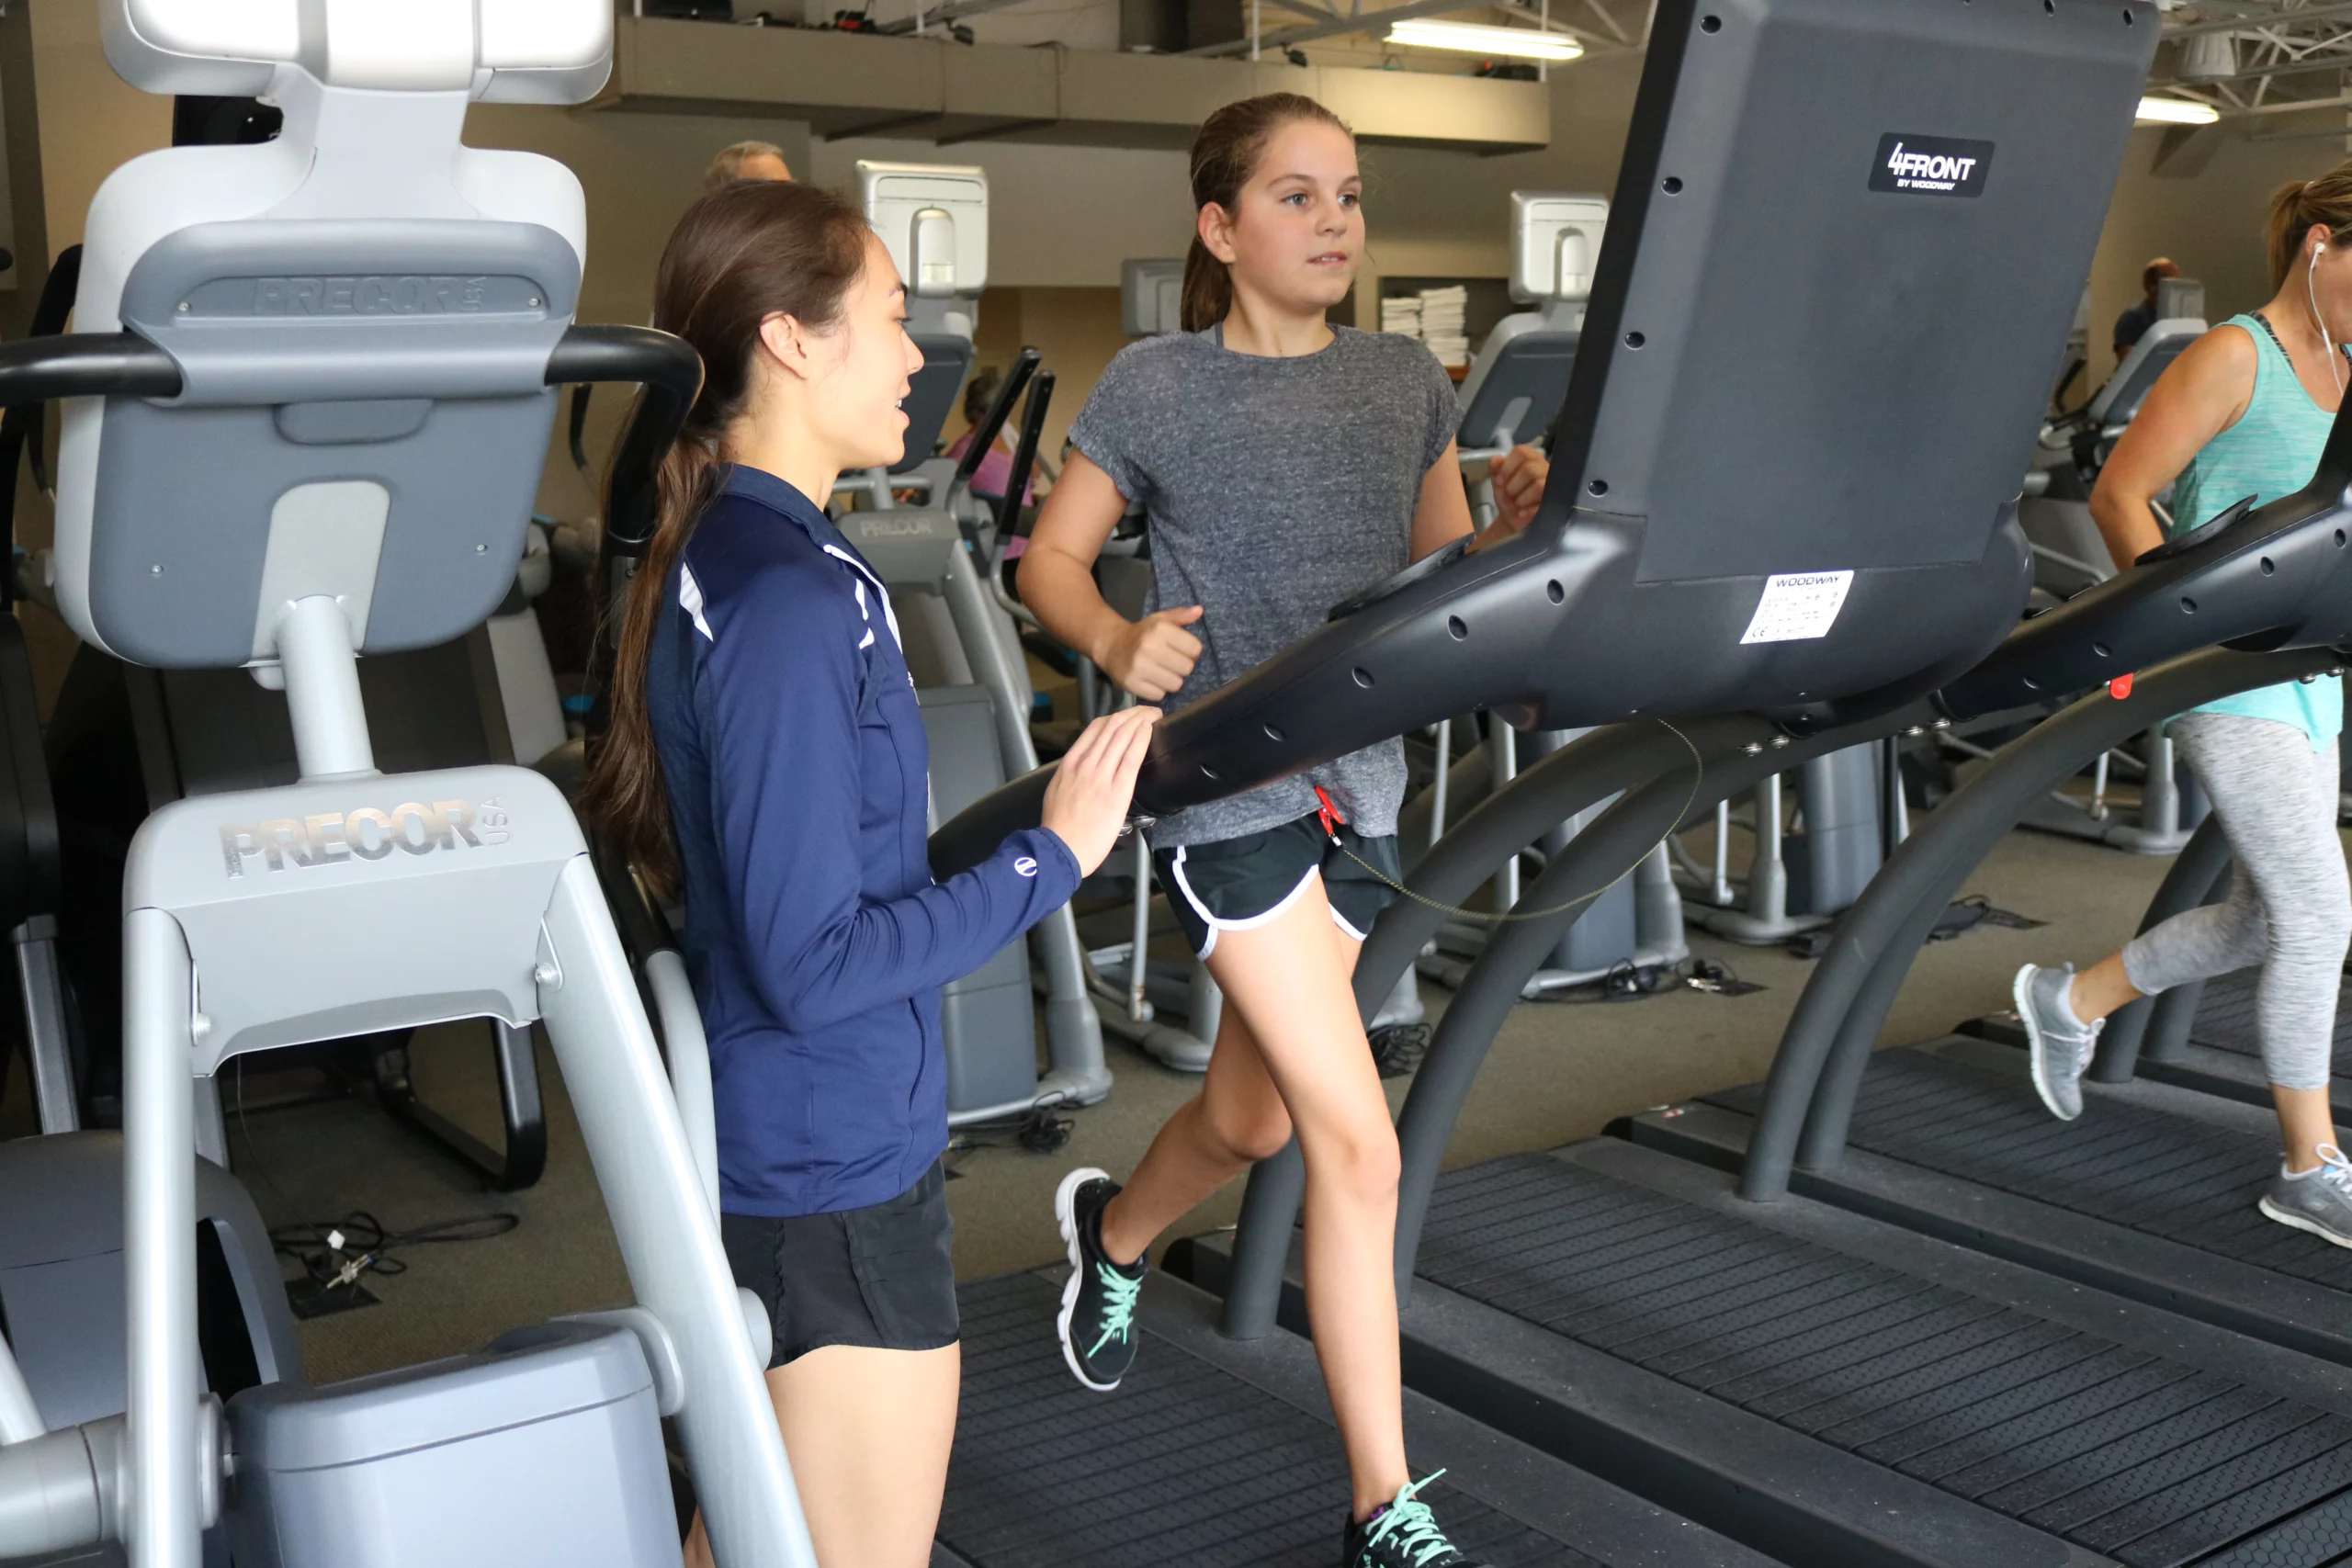 Wheaton Sport Center works out with trainer, running on treadmill